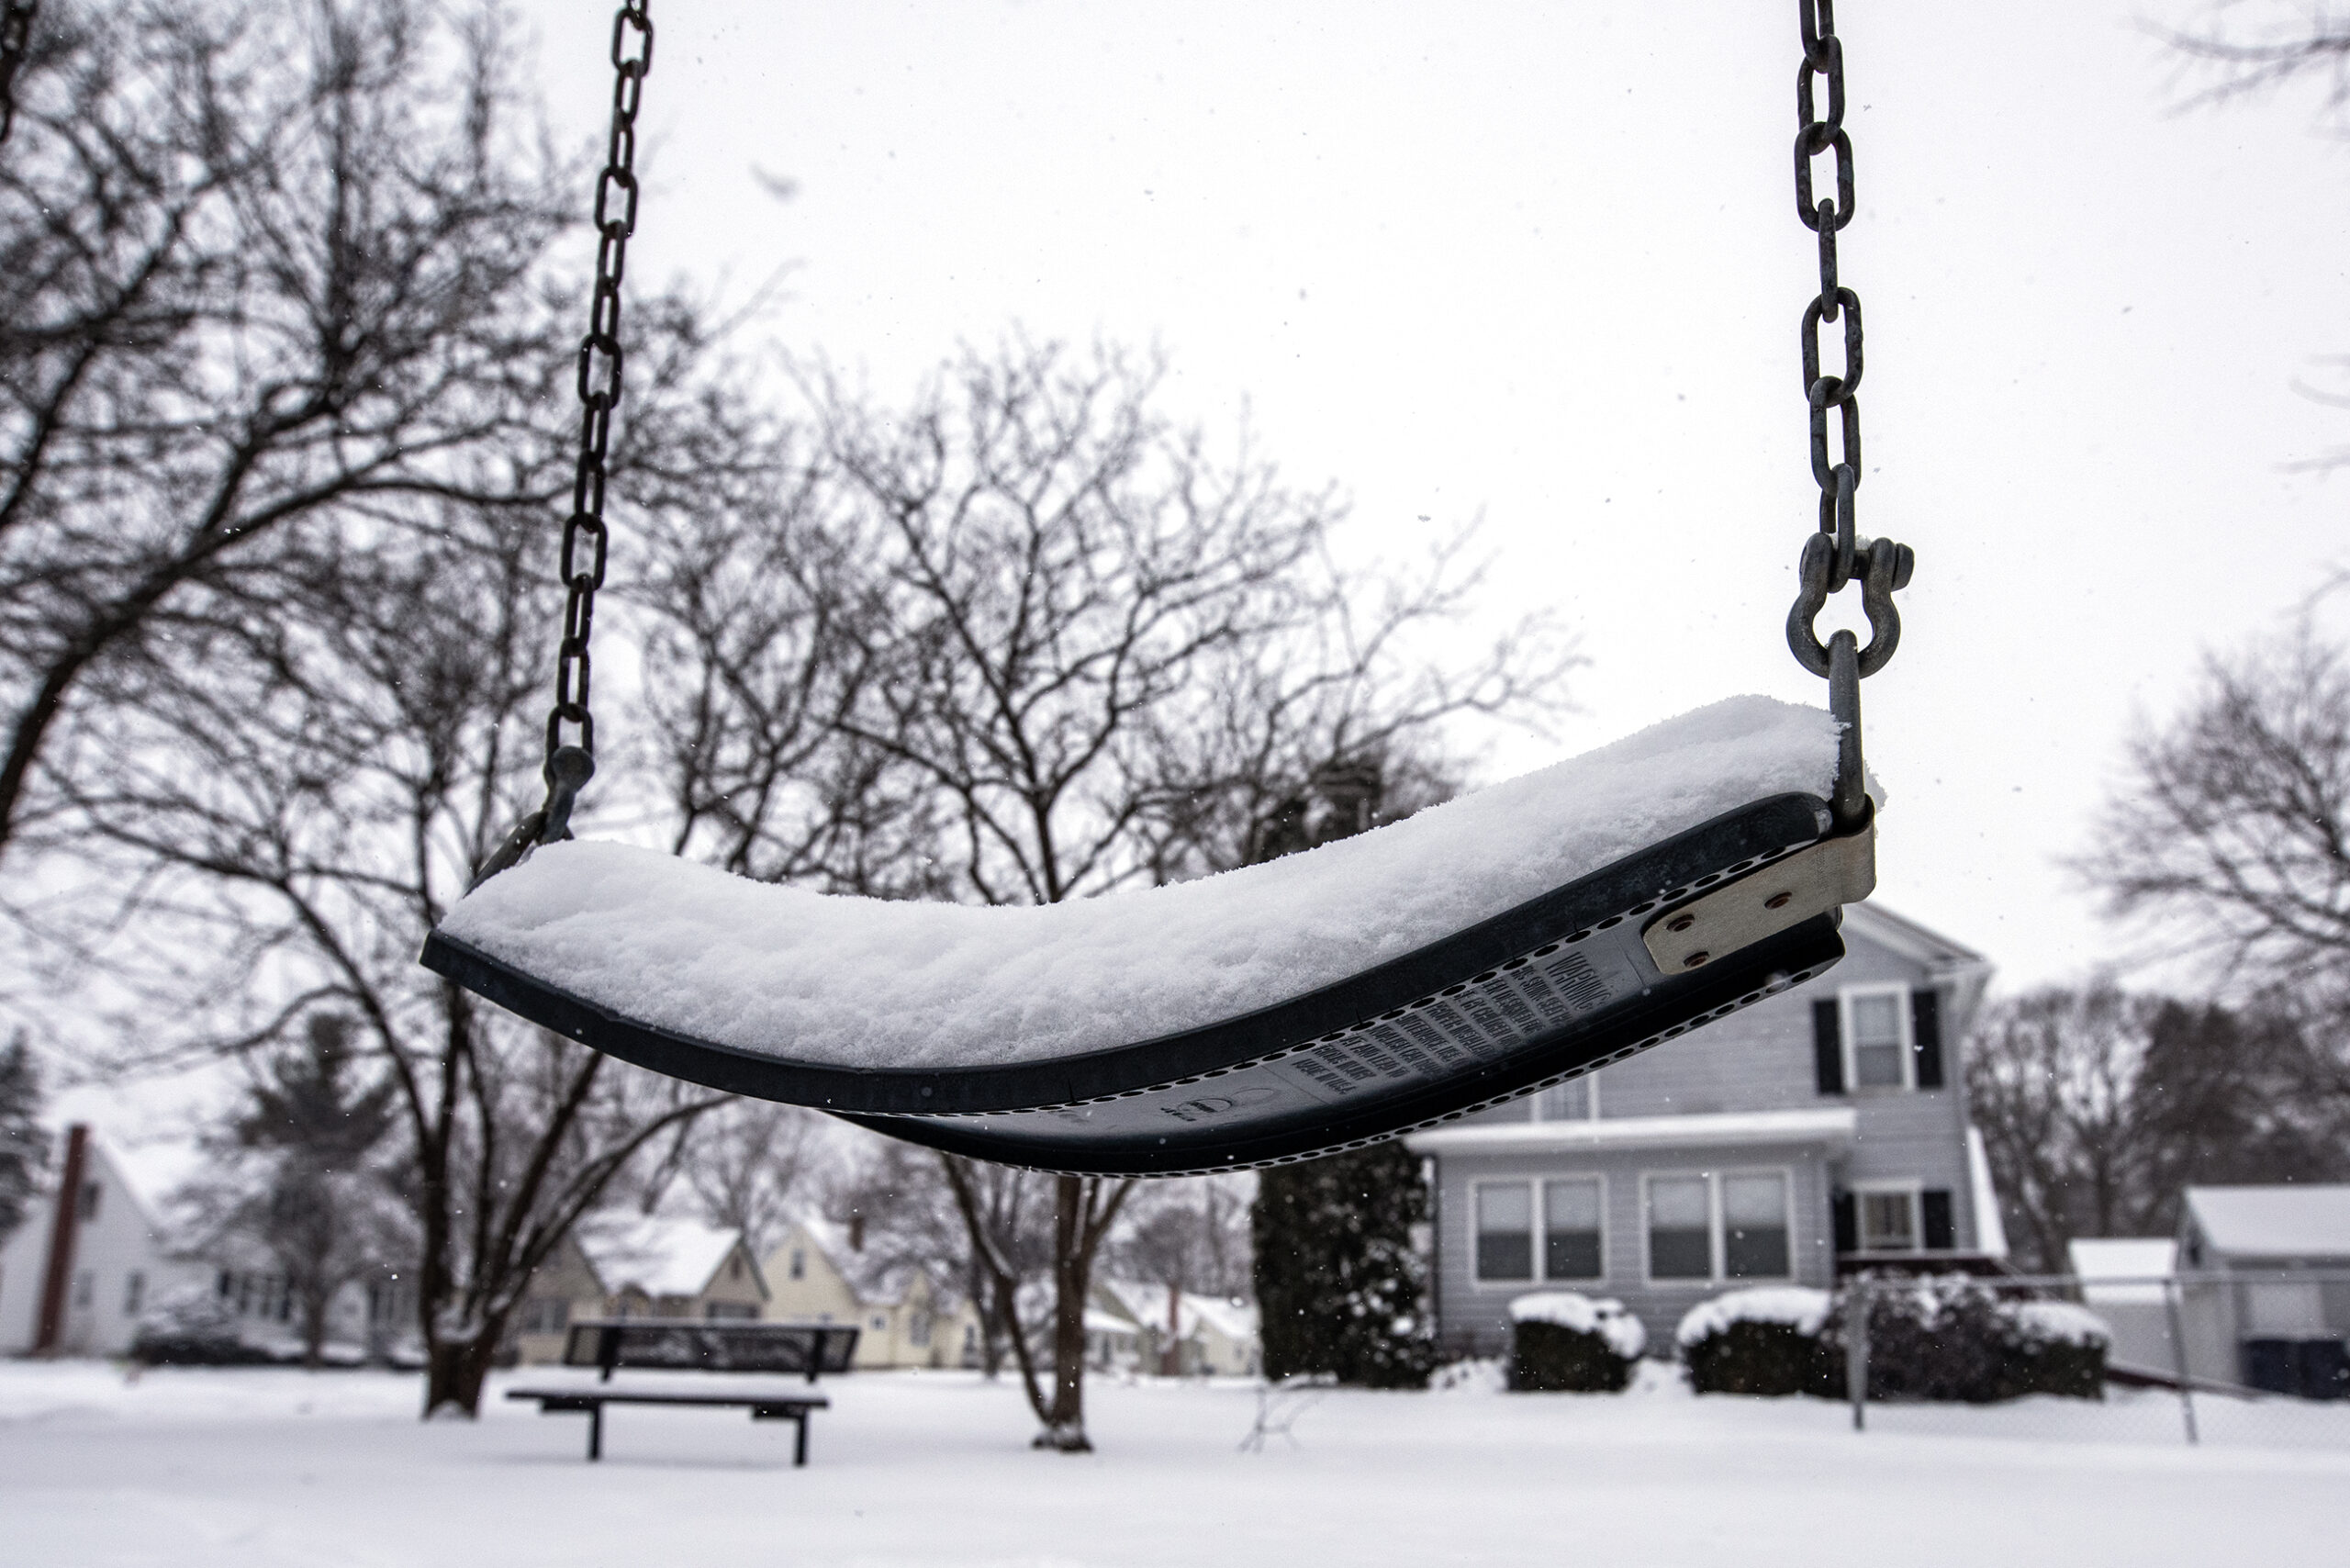 A layer of snow covers the seat of a playground swing in a neighborhood.